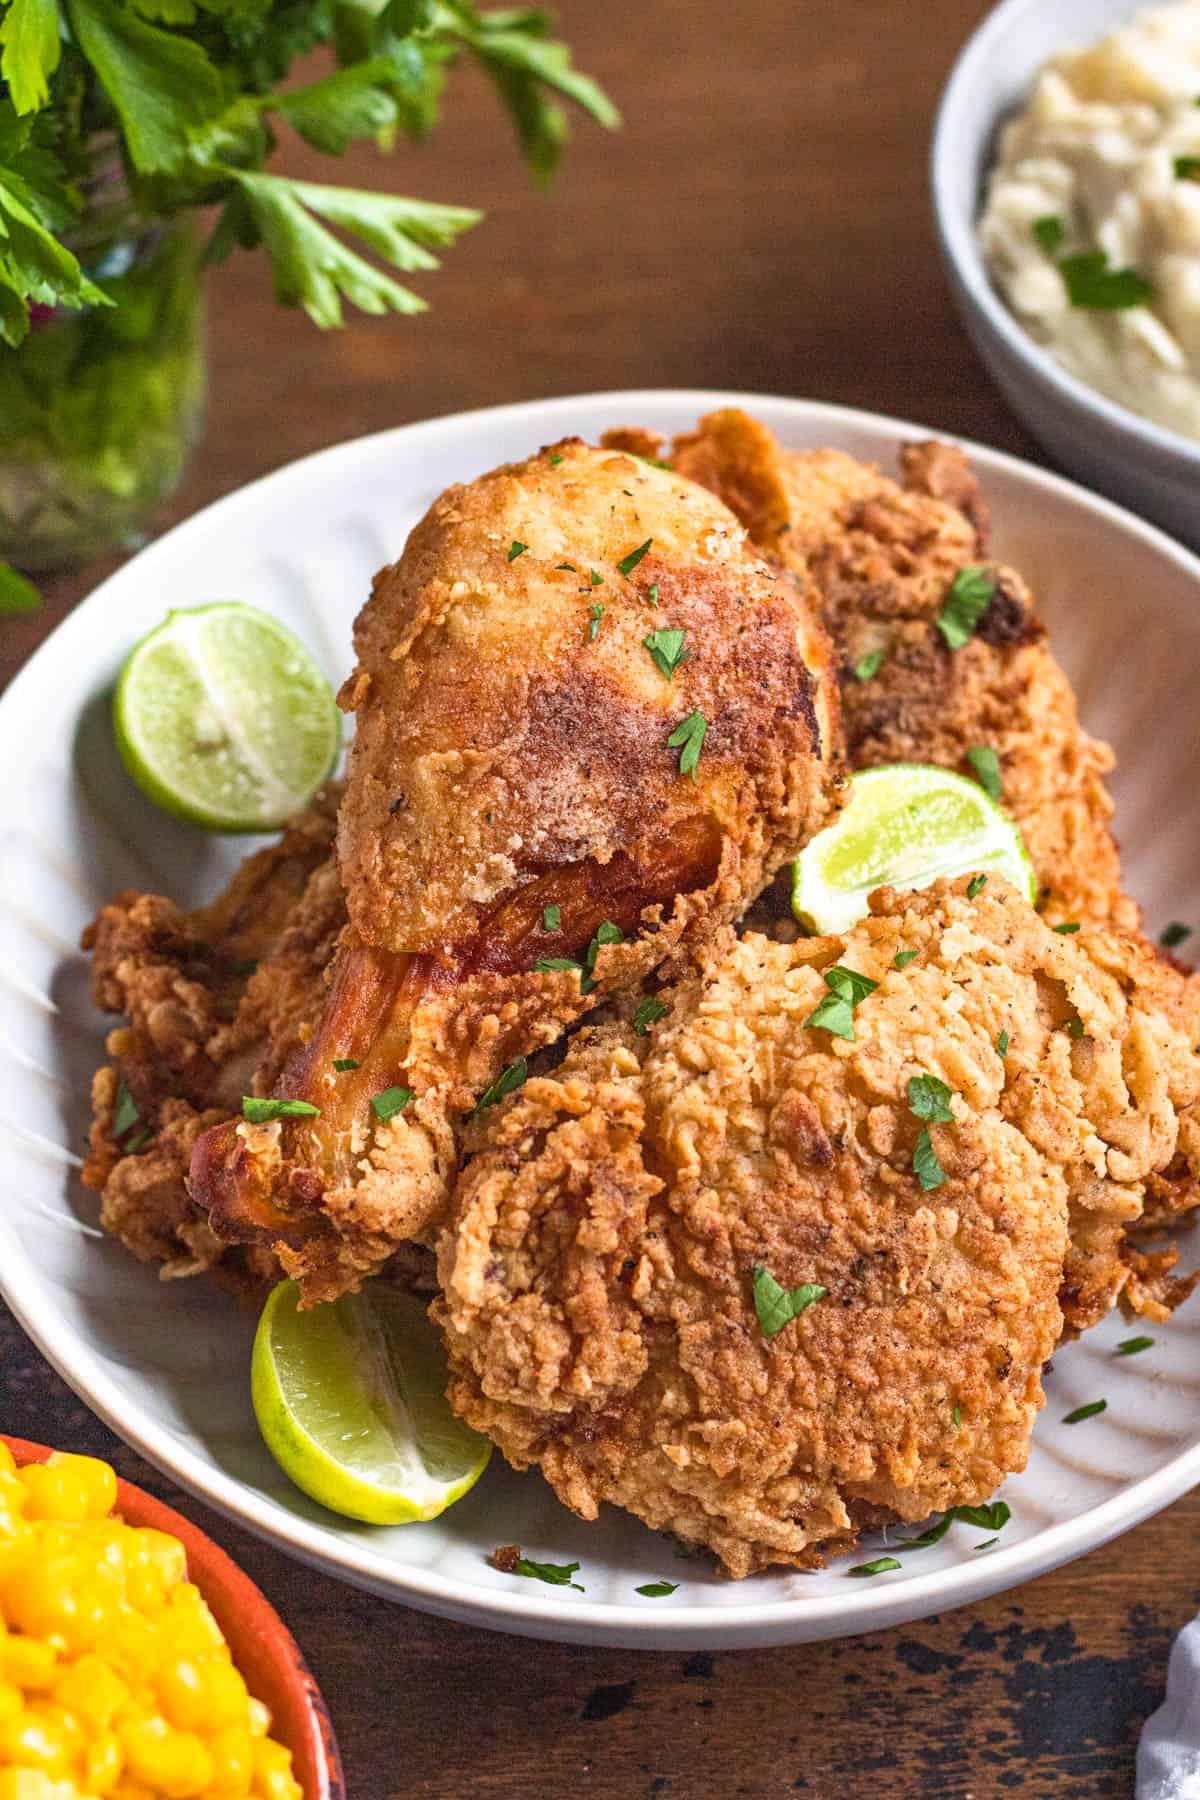 Gluten Free Fried Chicken Recipe on a plate with limes